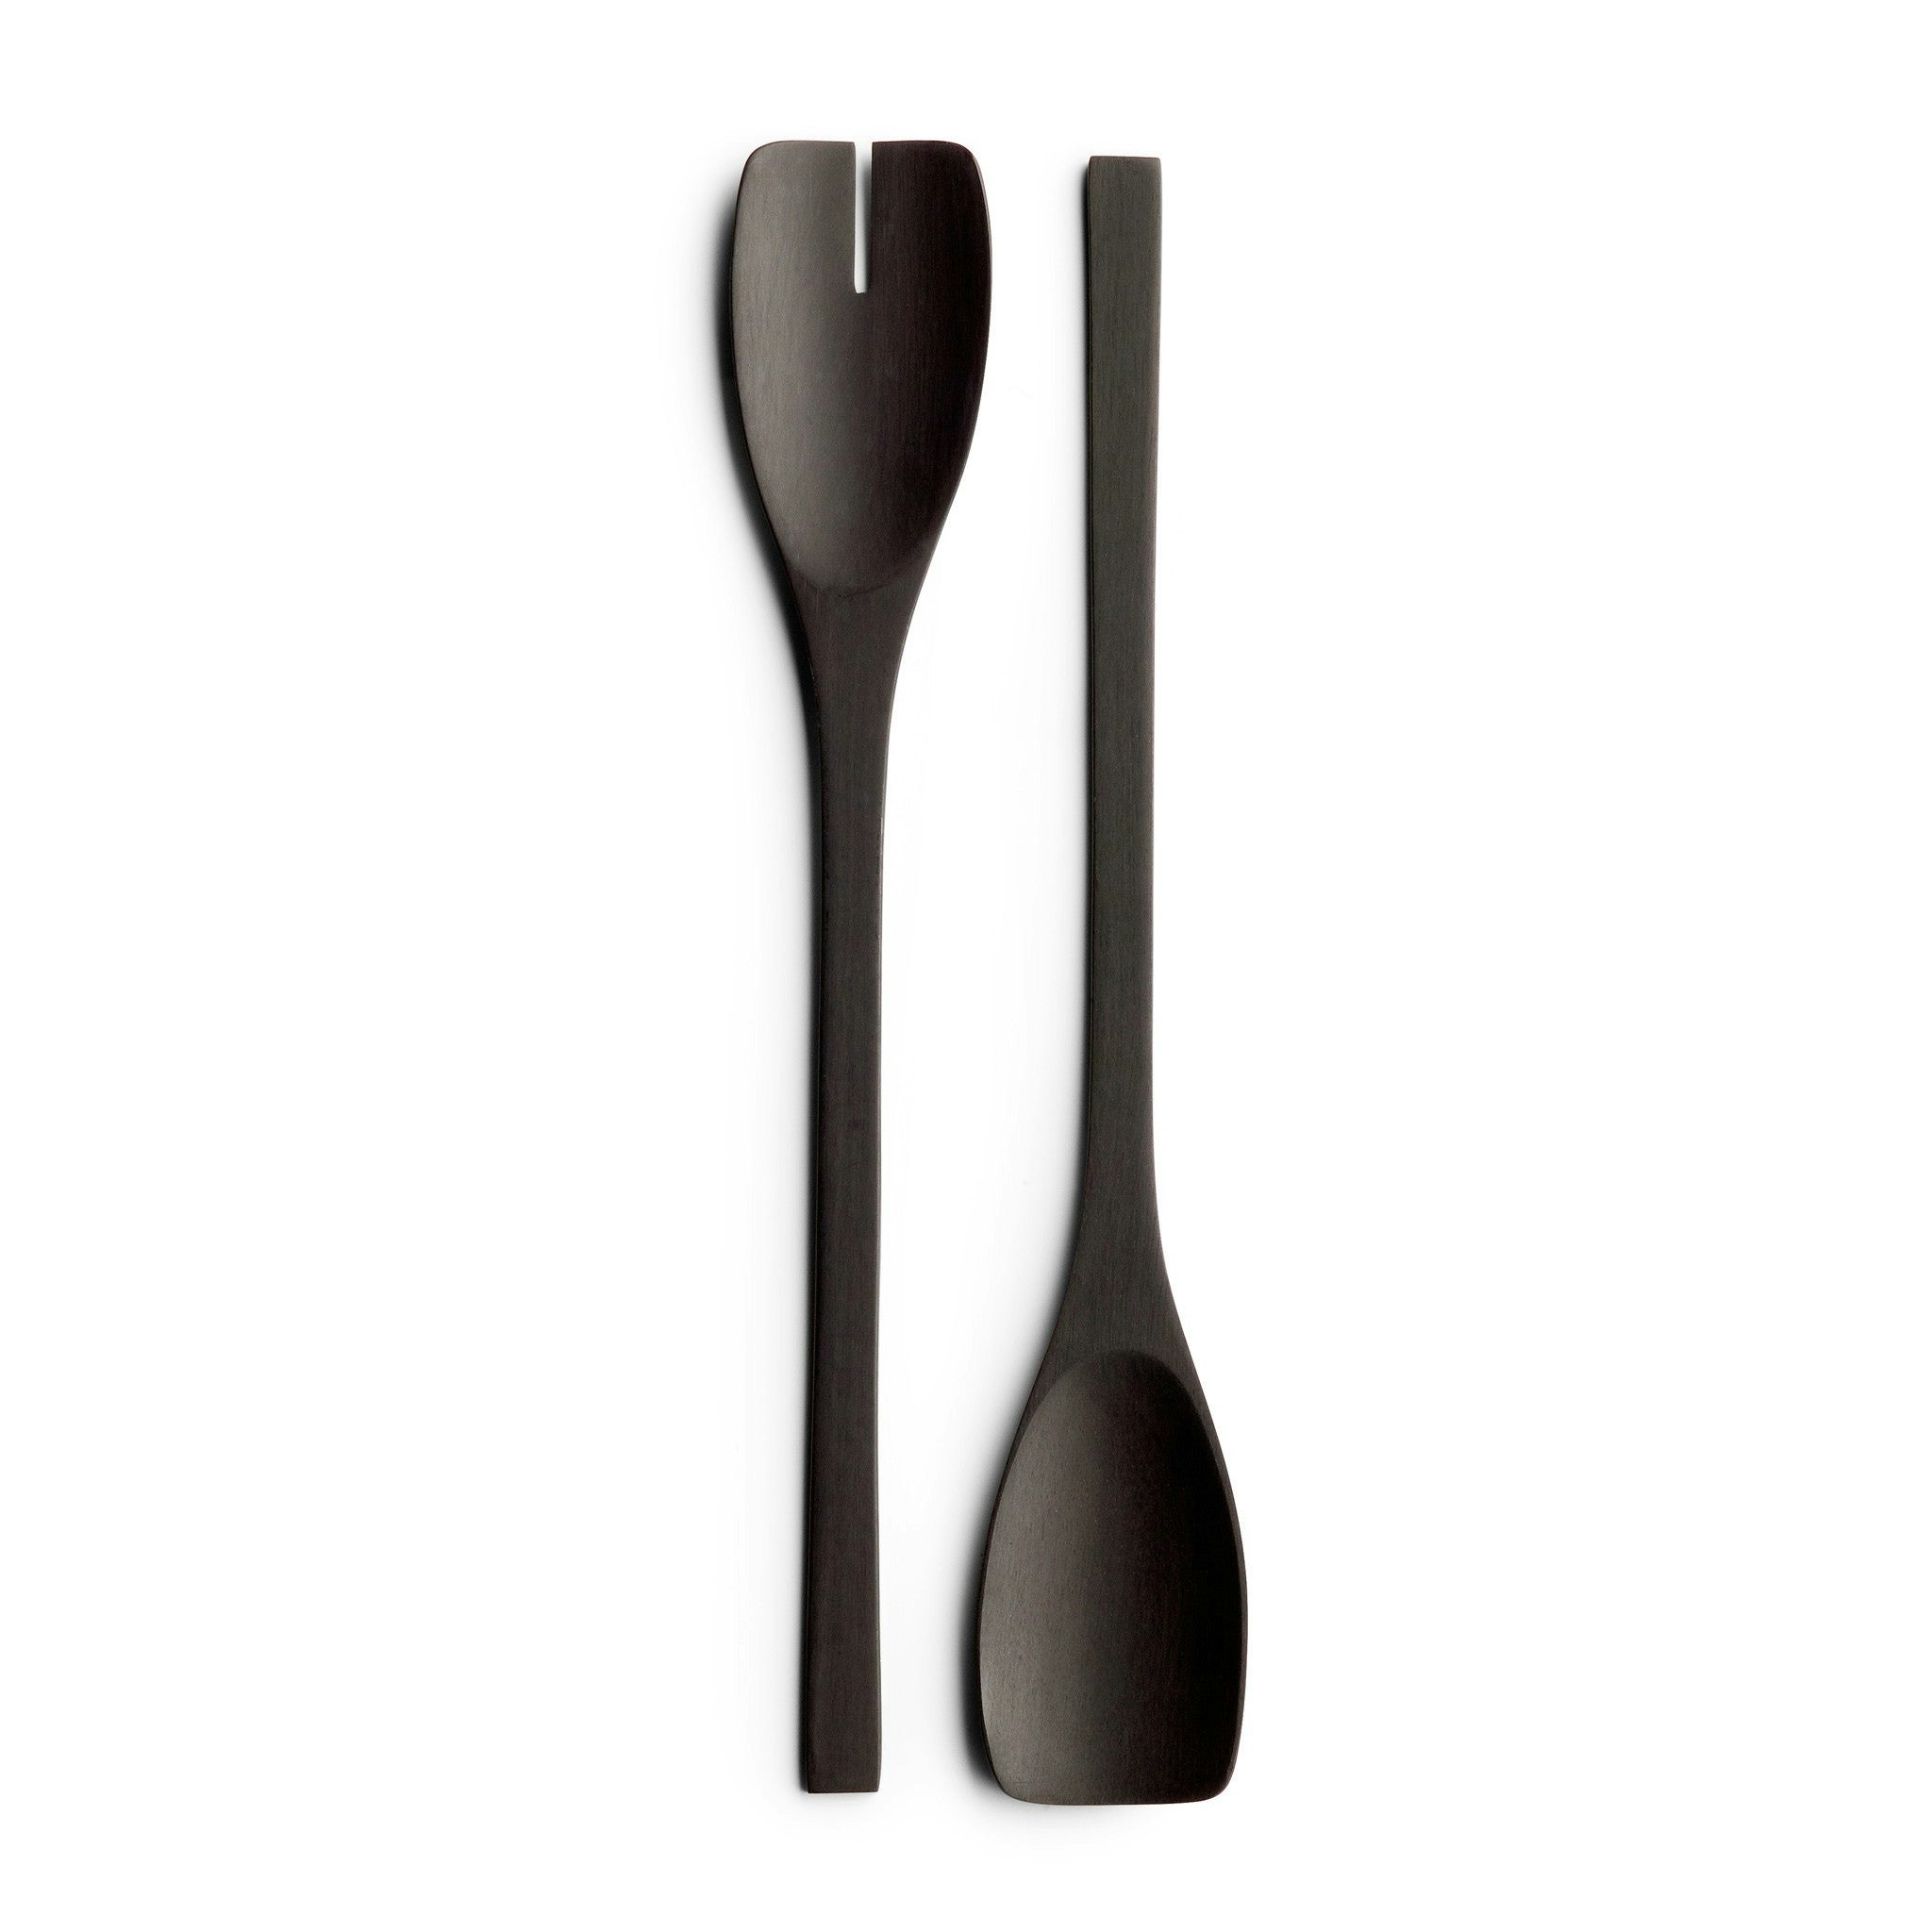 Salad Servers by John Pawson for When Objects Work